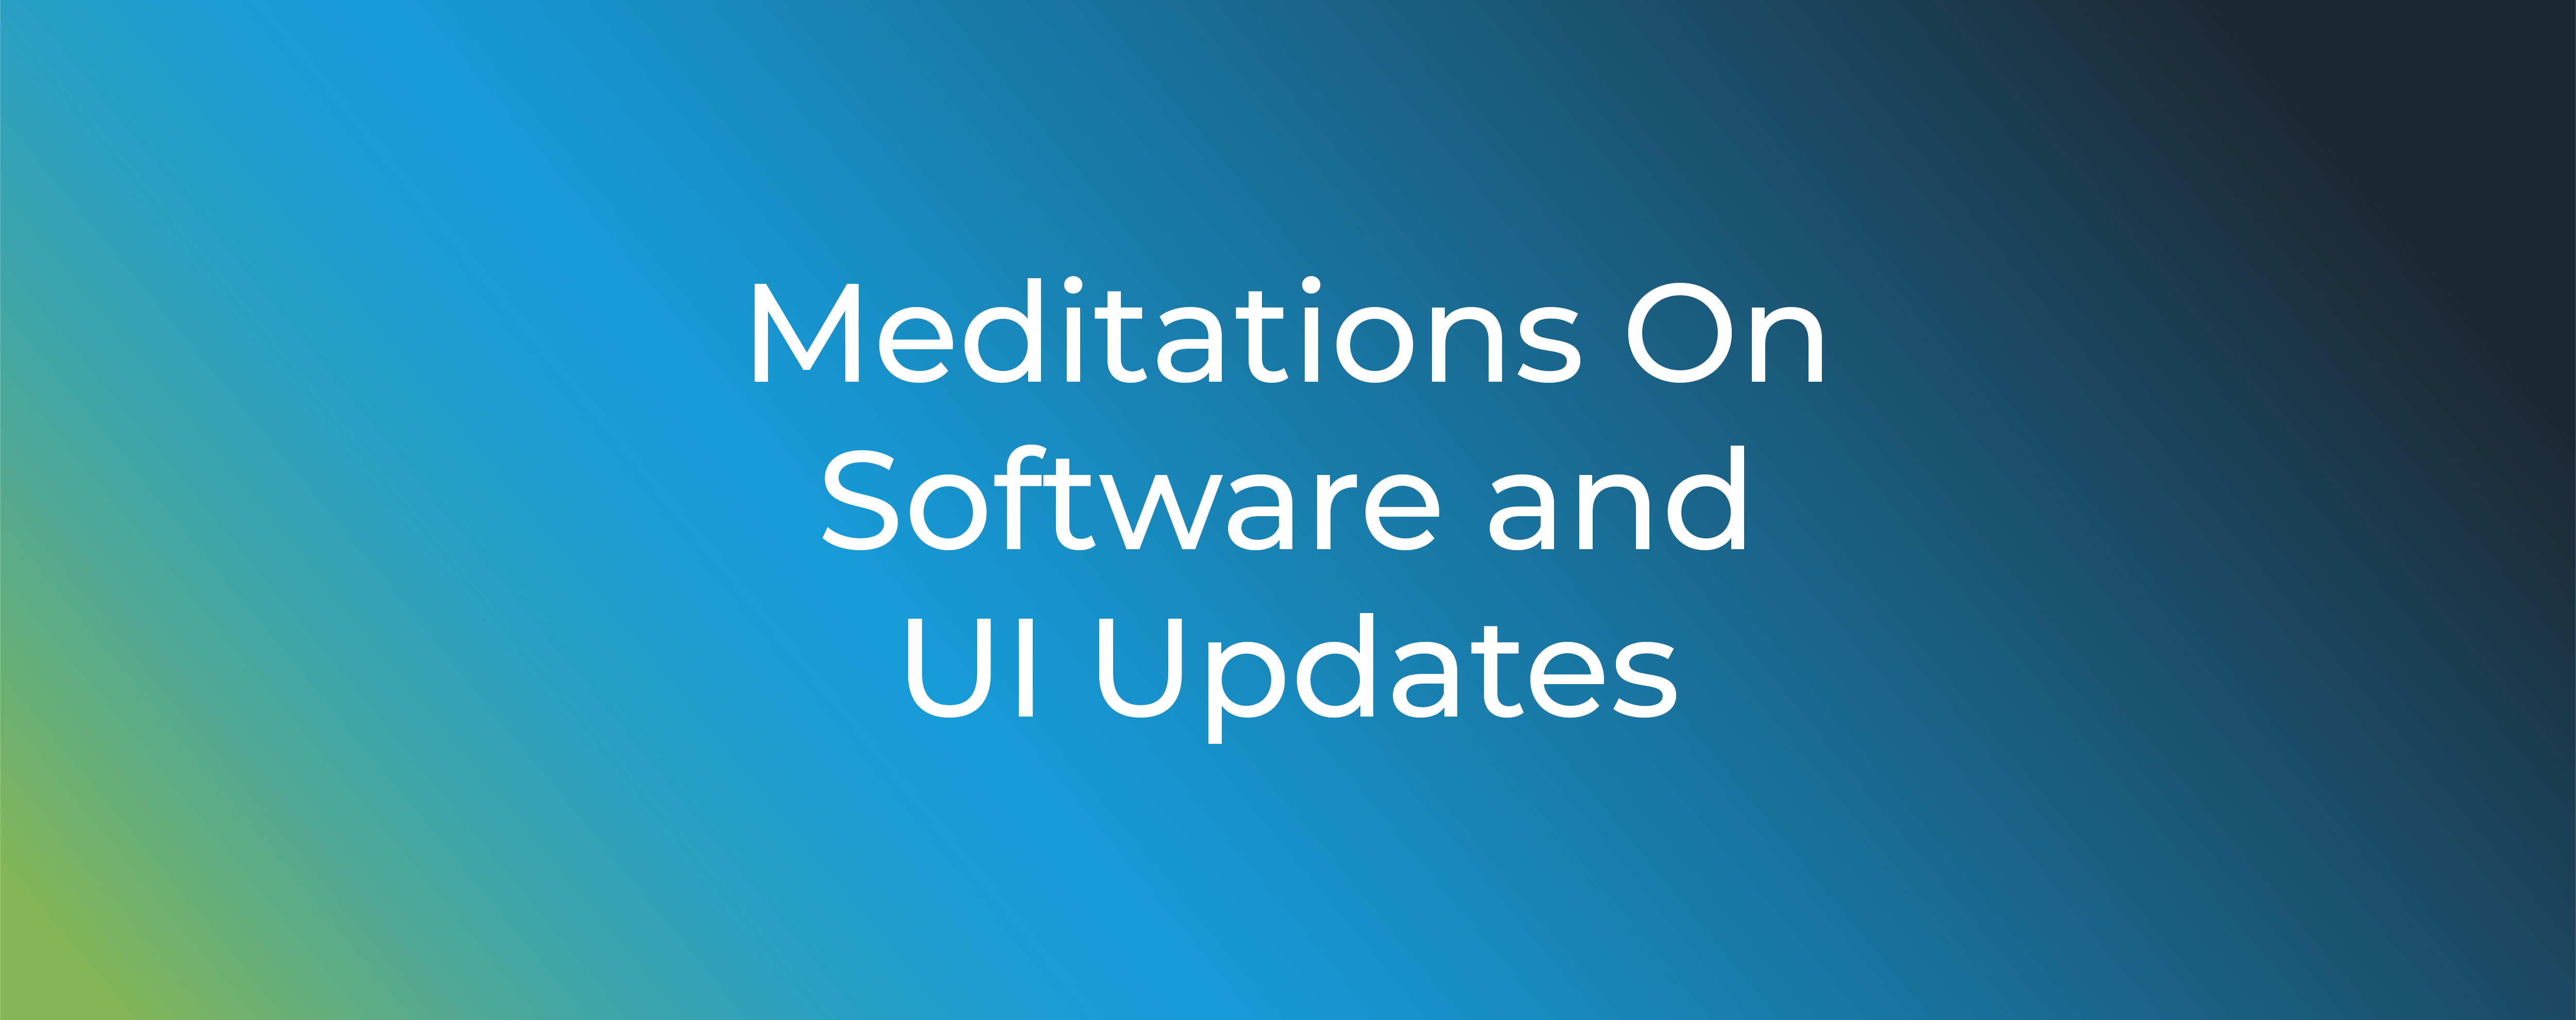 Meditations On Software And UI Updates